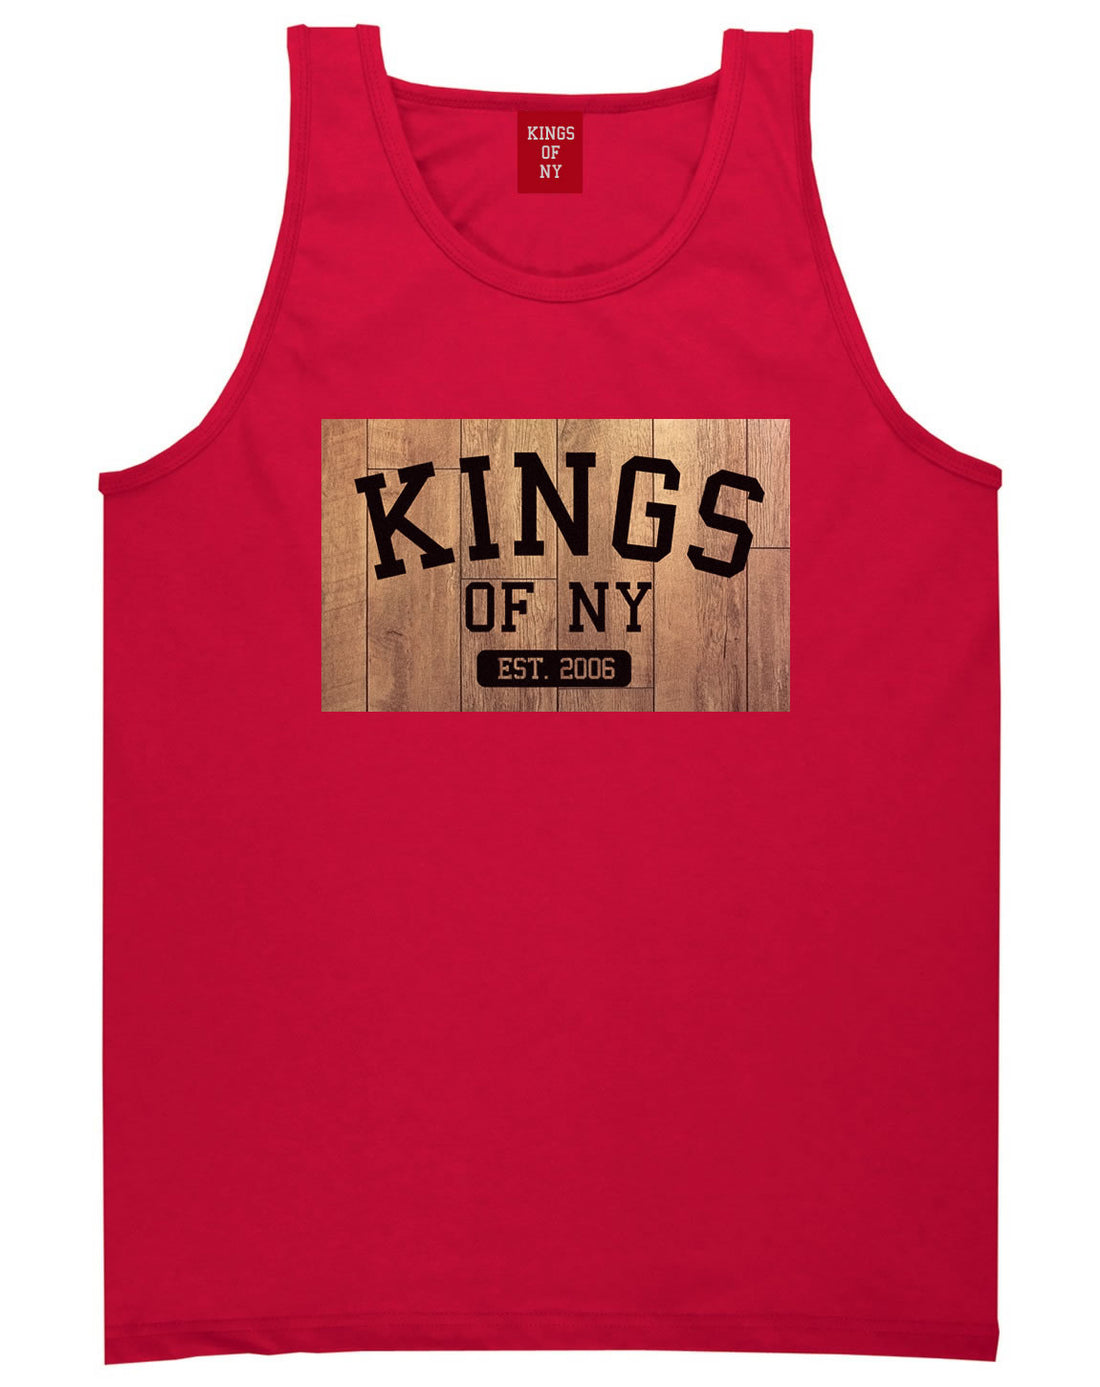 Hardwood Basketball Logo Tank Top in Red by Kings Of NY